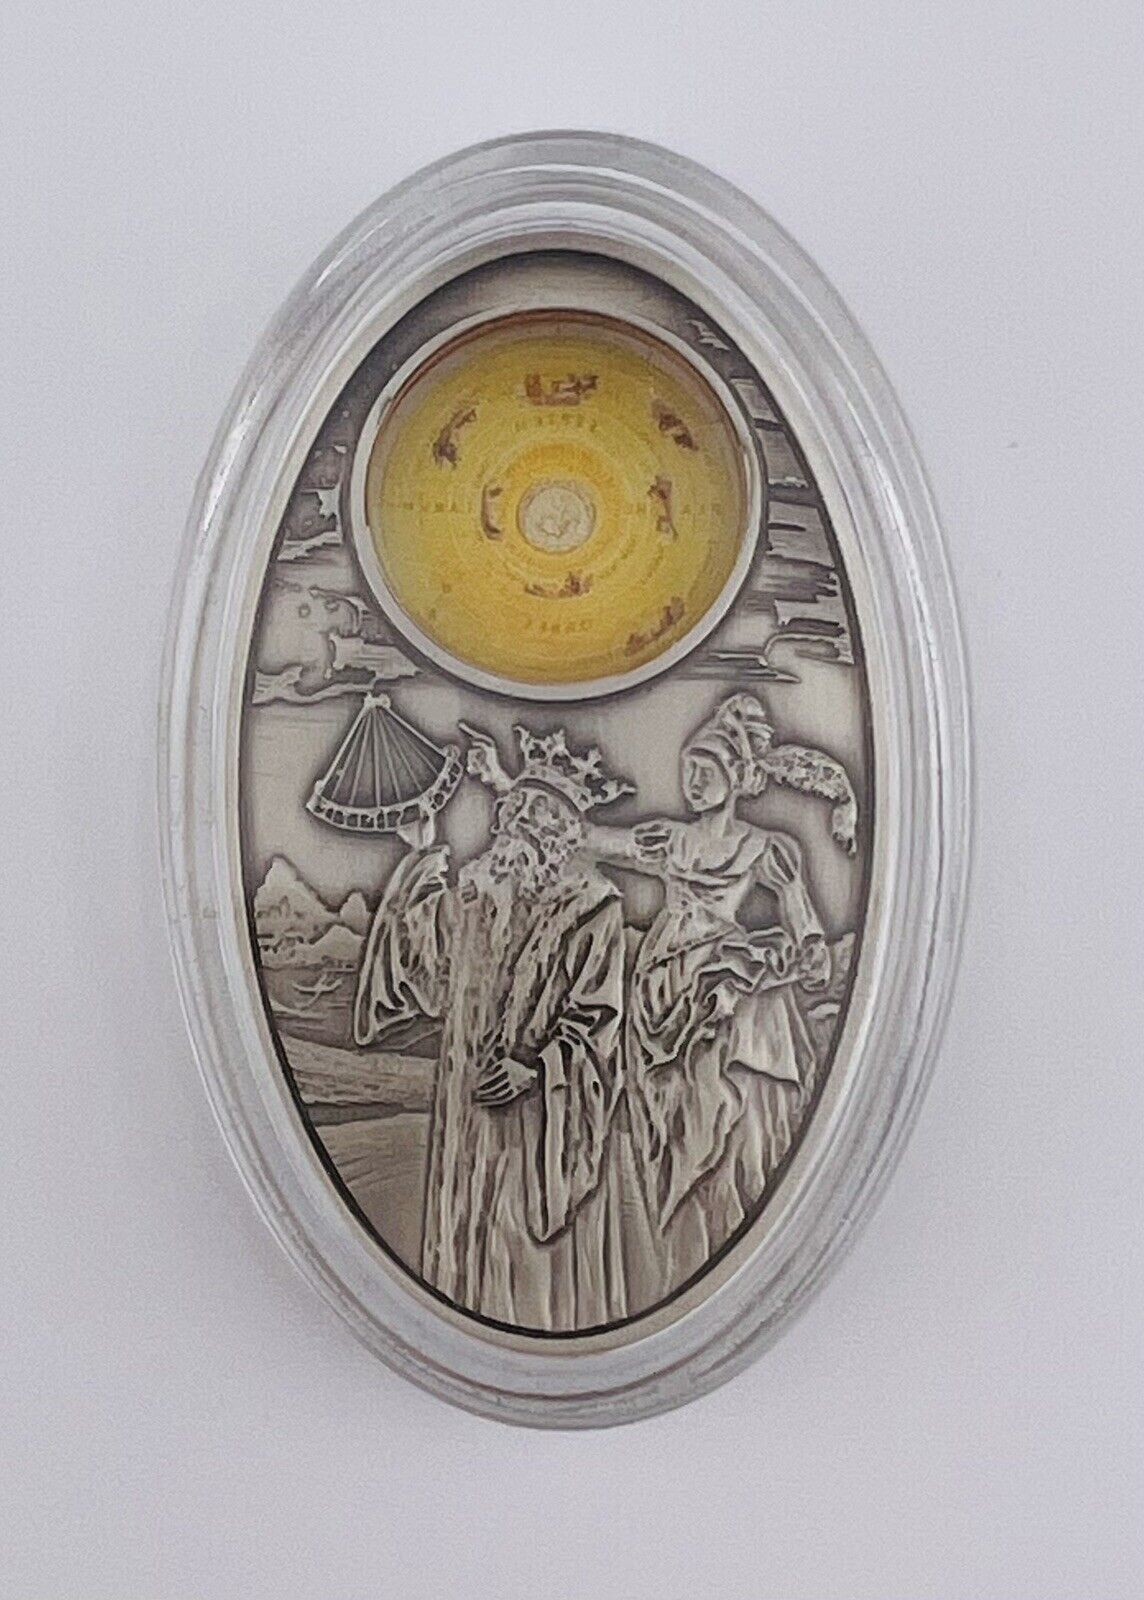 $10 Apocalypse Almagest Silver Coin Fiji 2012 Printed Glass Inlay